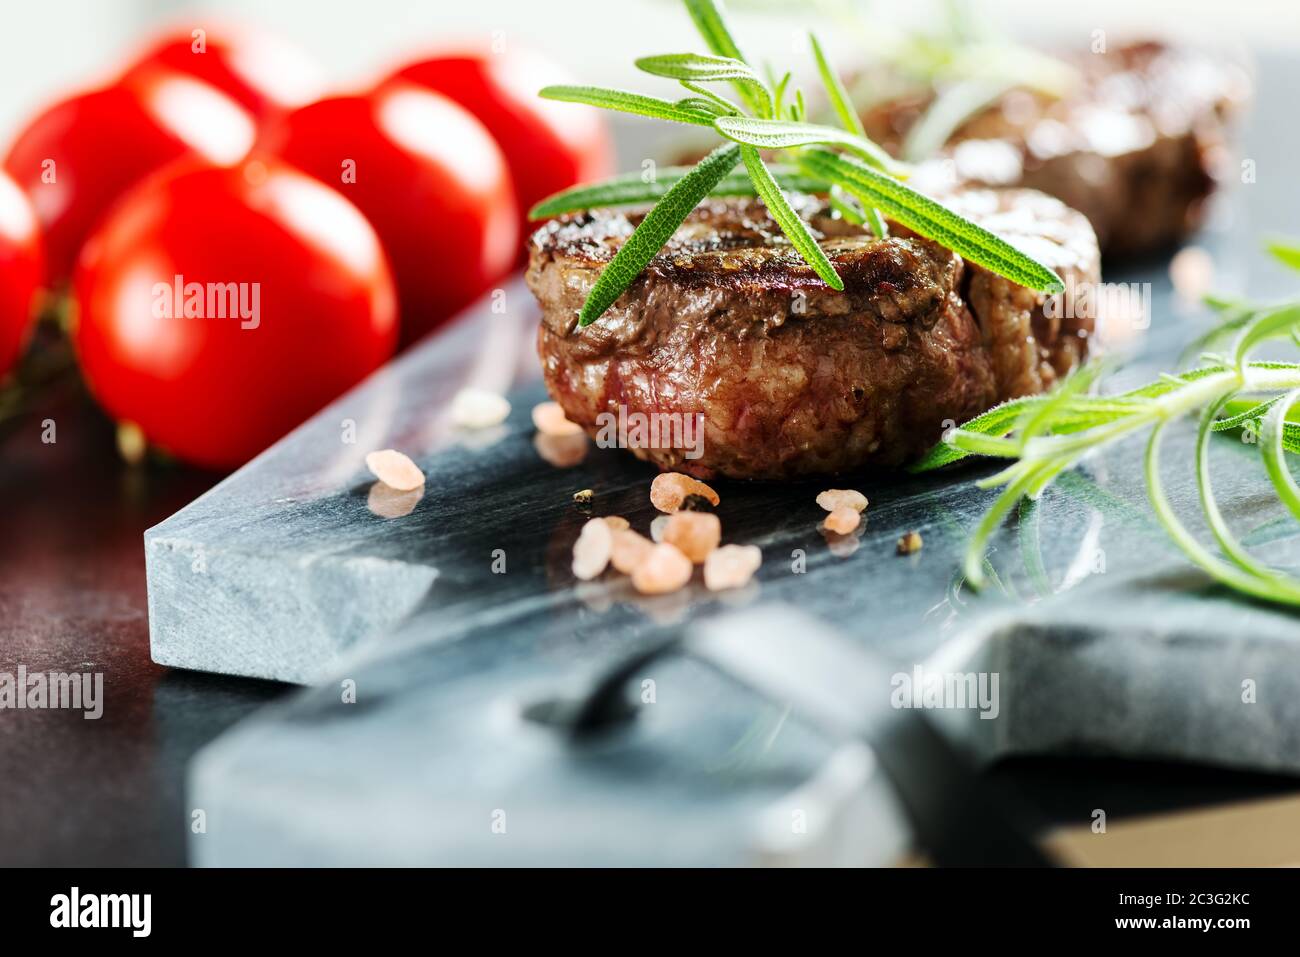 Beef steak with rosemary Stock Photo